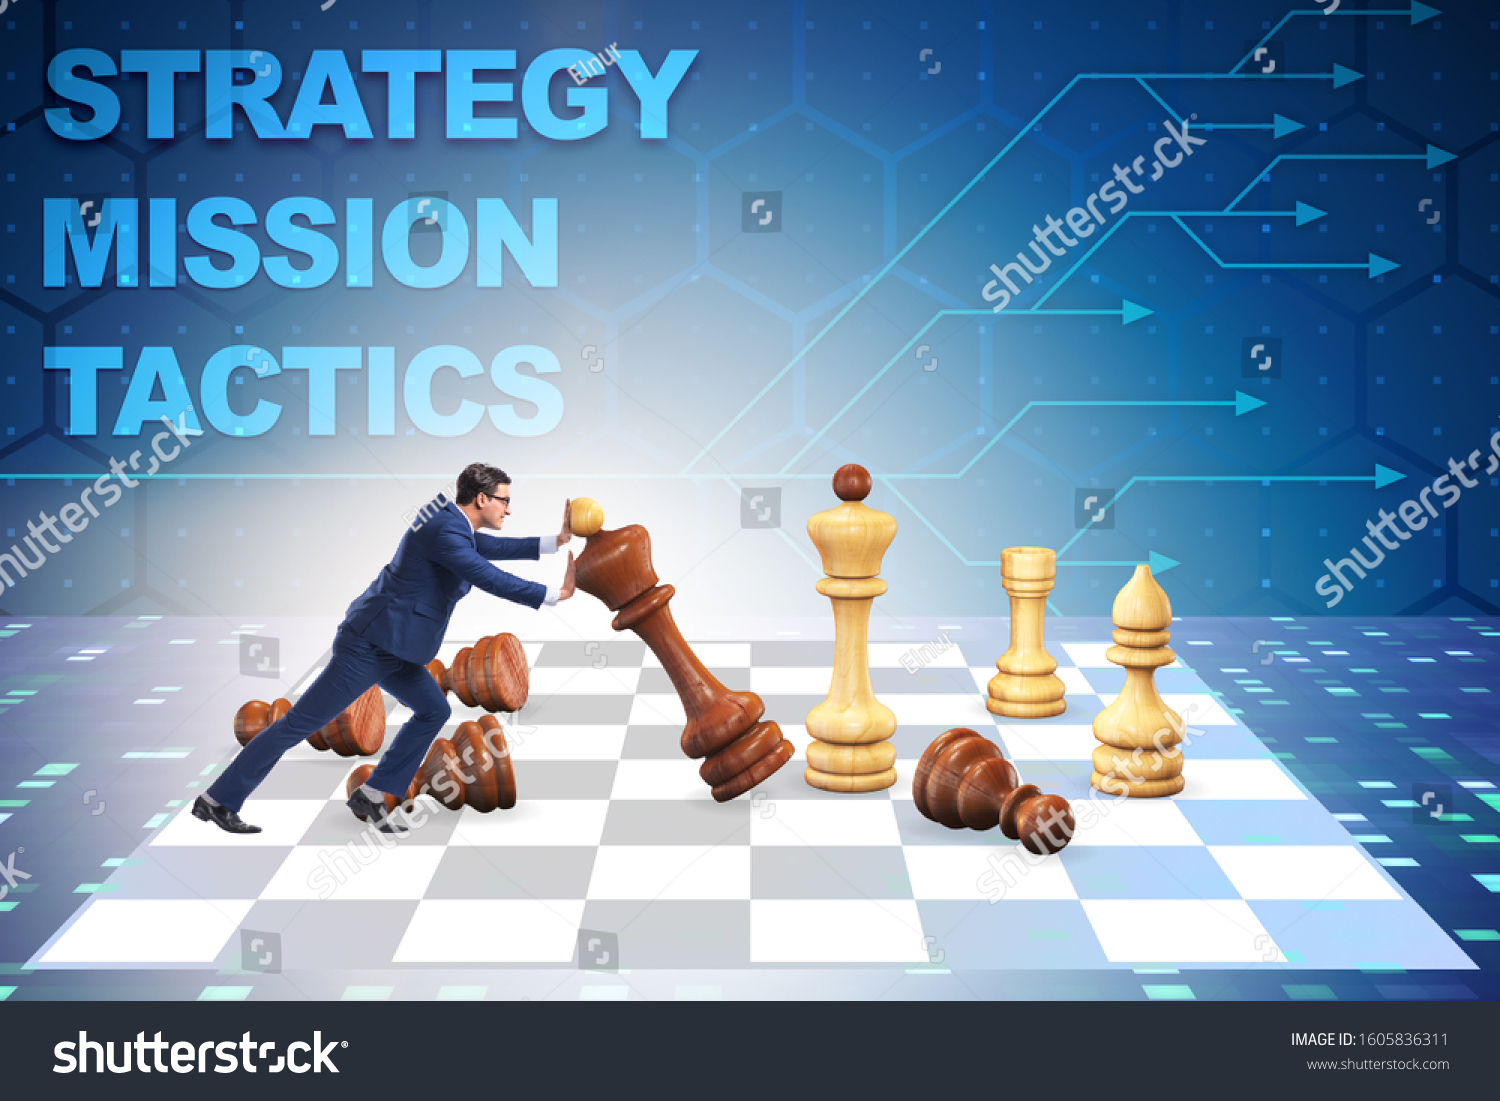 Strategy and tactics concept with businessman #1605836311